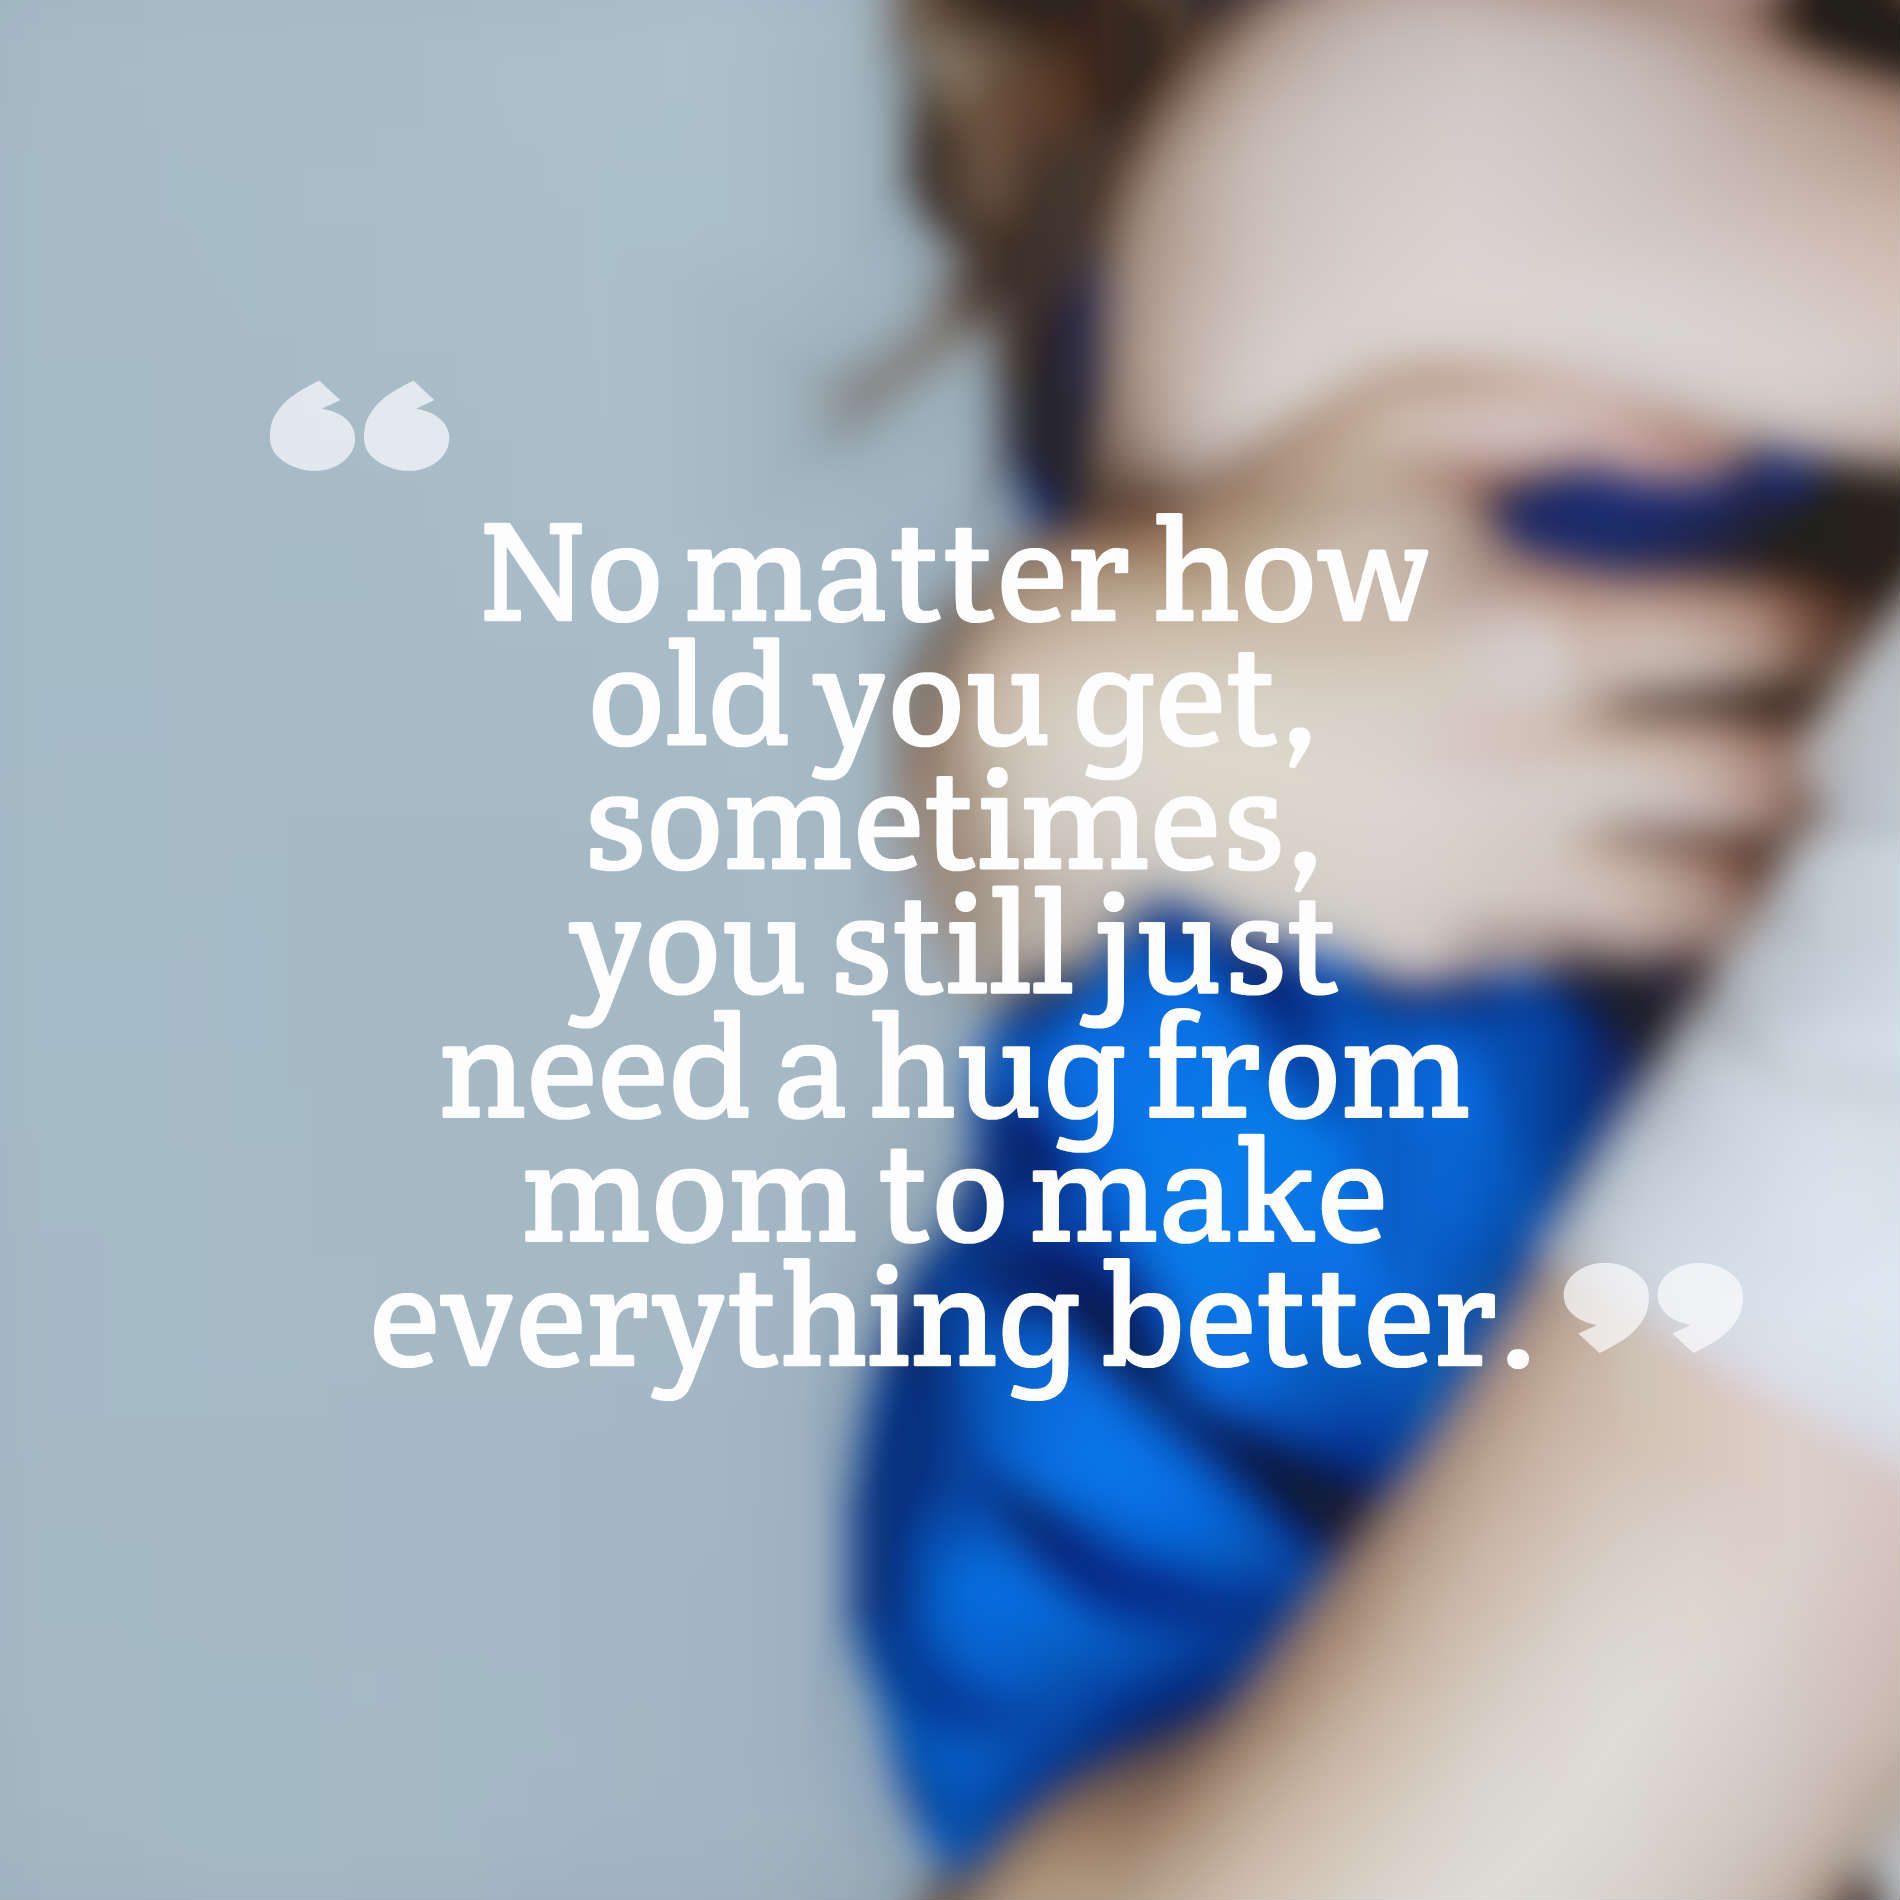 No matter how old you get, sometimes, you still just need a hug from mom to make everything better.